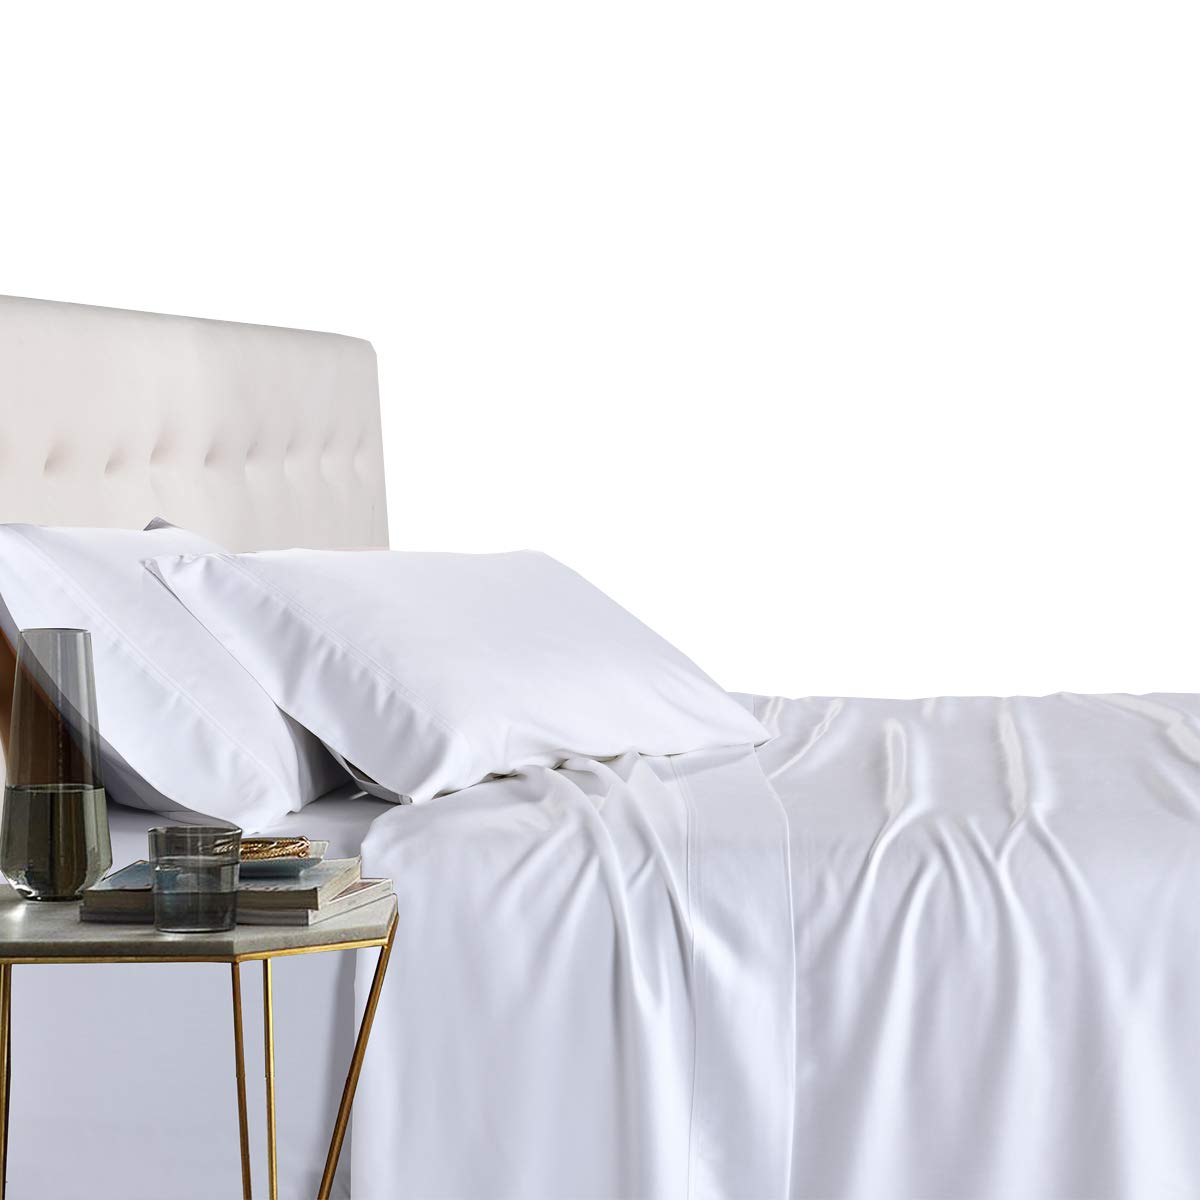 Royal Tradition 100 Percent Bamboo Bed Sheet Set, Queen, Solid White, Super Soft and Cool Bamboo Viscose 4PC Sheets